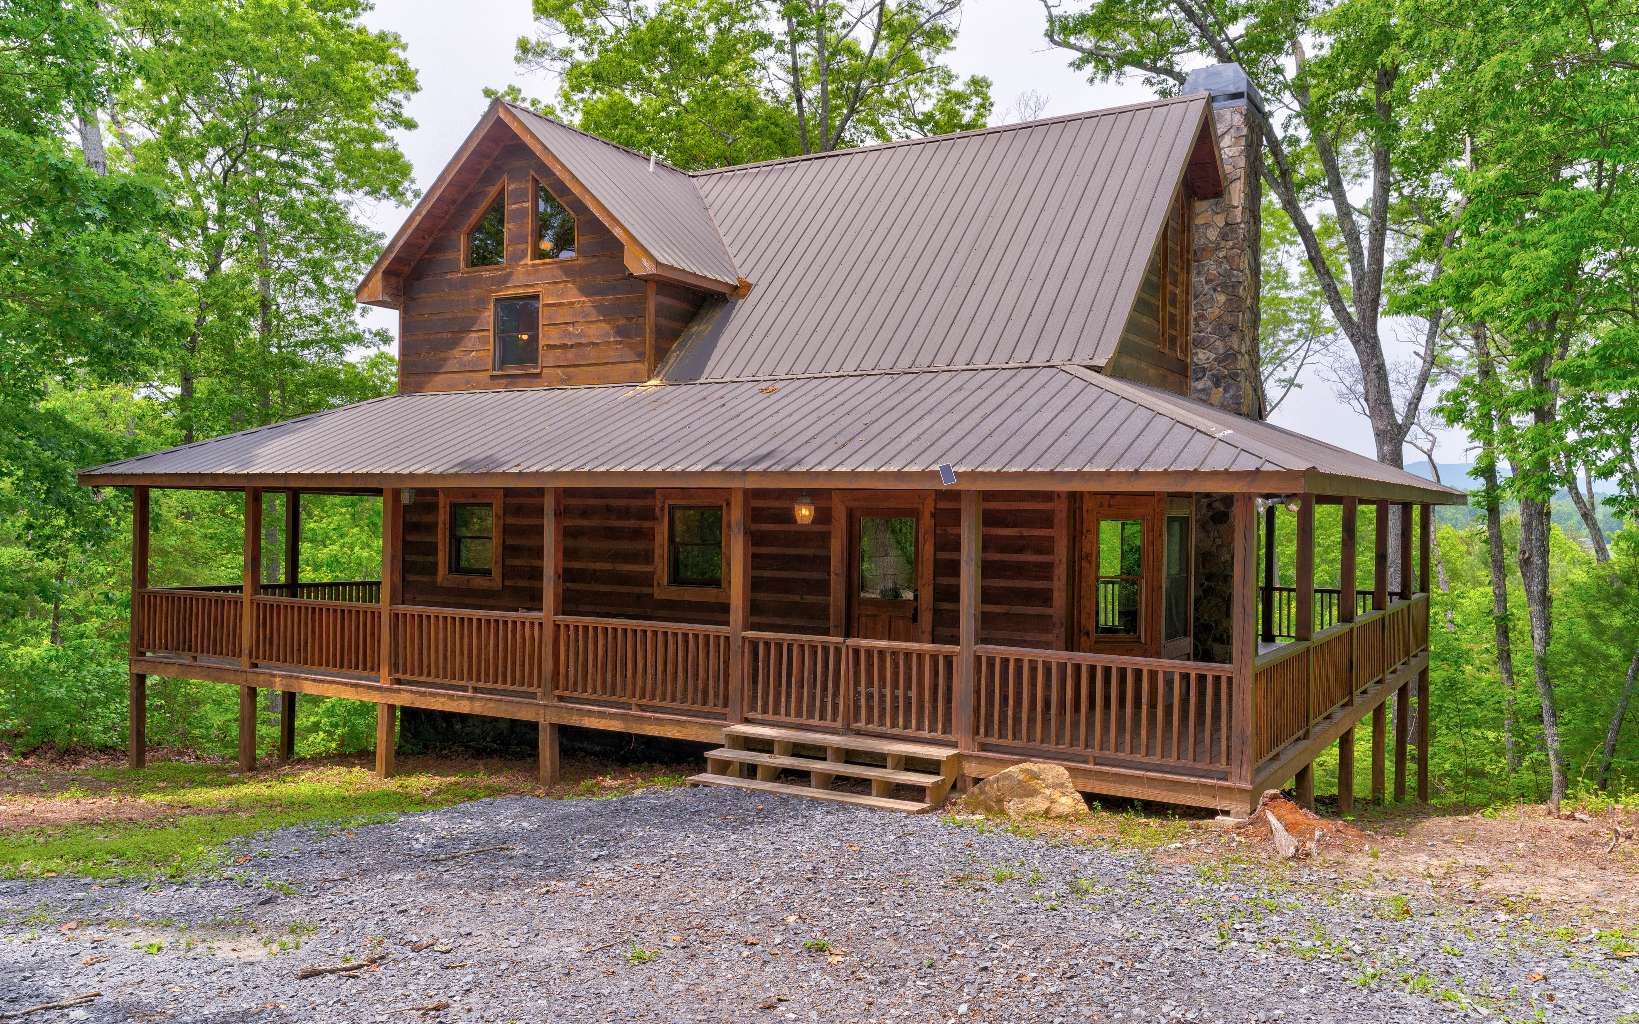 Breathtaking views from this turn-key cabin. Private setting on a cul-de-sac. Minutes to Blue Ridge and McCaysville. Basement was recently completed and includes french doors leading to the hot tub. Wrap around decks to enjoy the serenity and views. Home features 3 bedrooms(one on each level),open concept floor plan with volume ceiling, jetted tub,and exquisite wood details including live edge counters- these are just some of the many upgrades. Activities nearby include wineries, kayaking, tubing, fishing, hiking and much more! Perfect cabin for 2nd home or rental. Fully furnished with separate bill of sale.